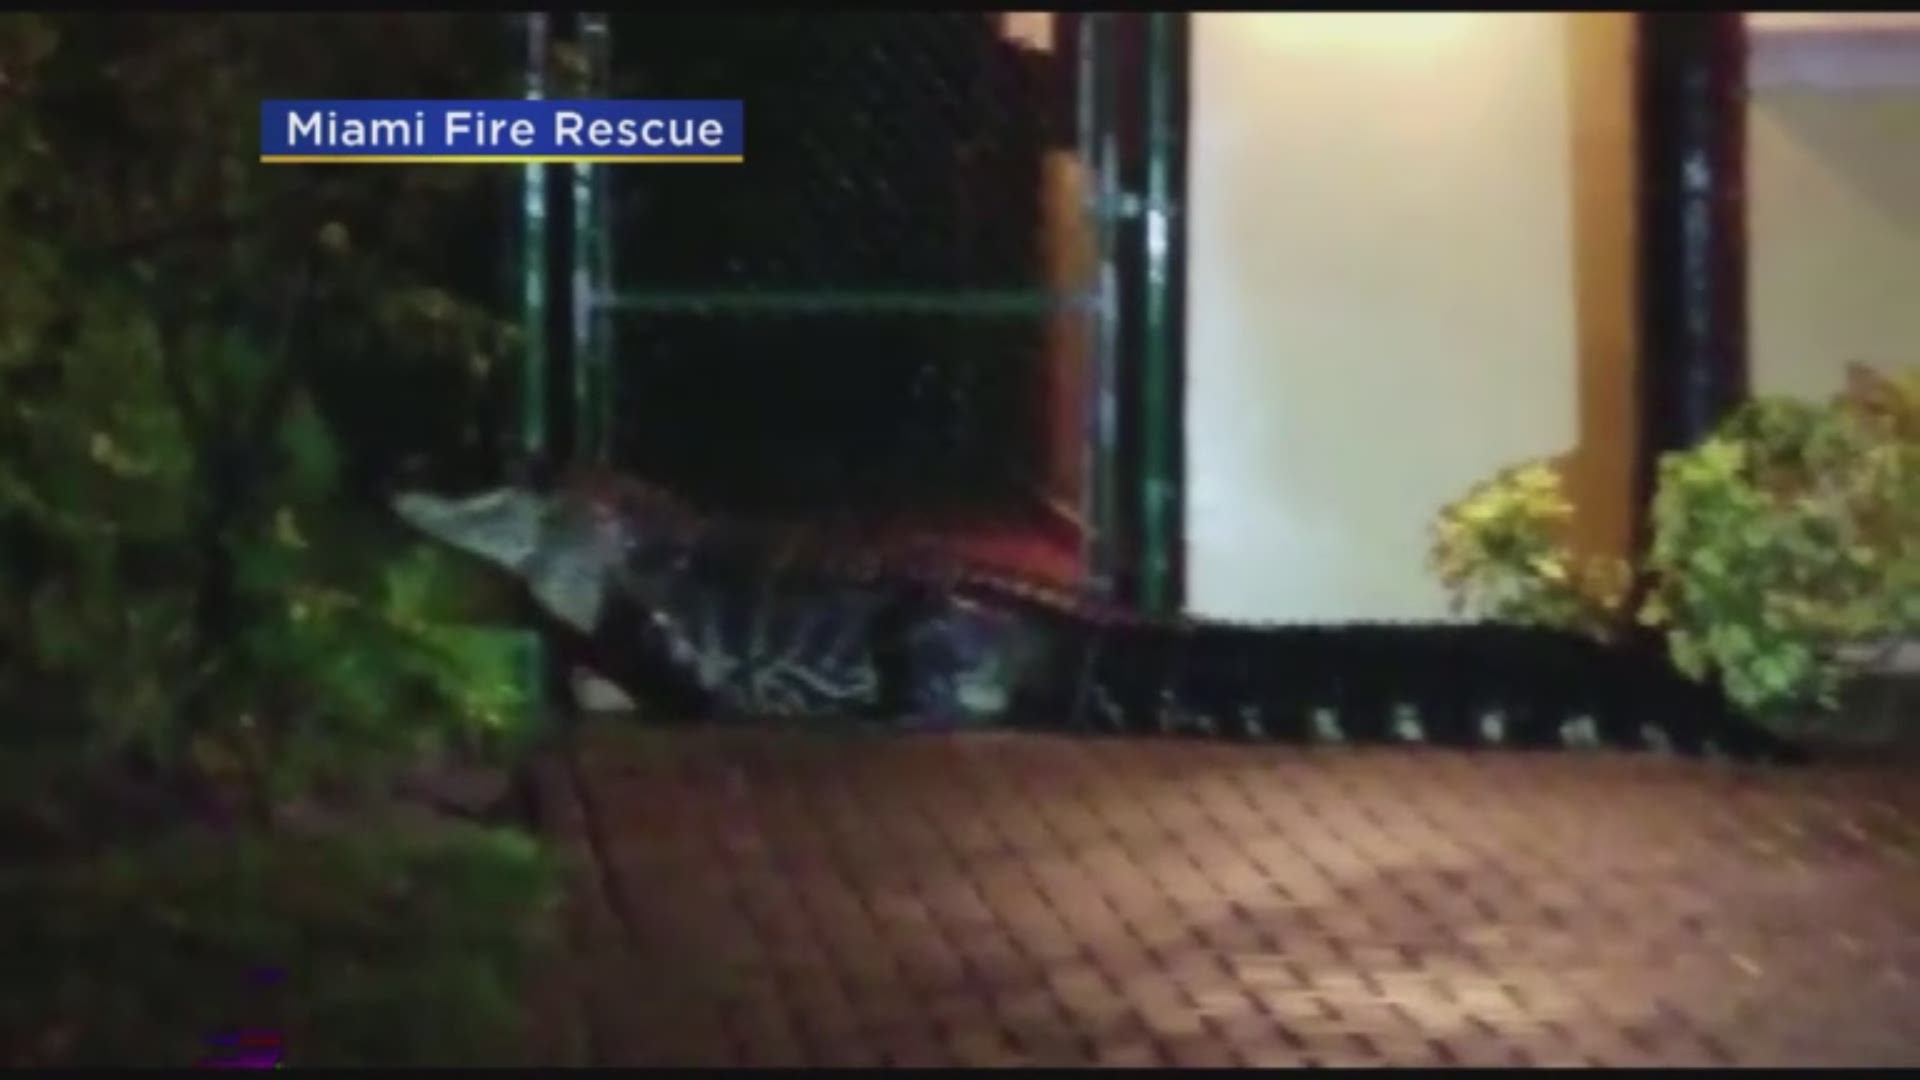 Miami Fire Rescue workers had to deal with a situation this weekend they aren’t often confronted with.
While heading back to their station, rescue workers spotted a massive alligator.